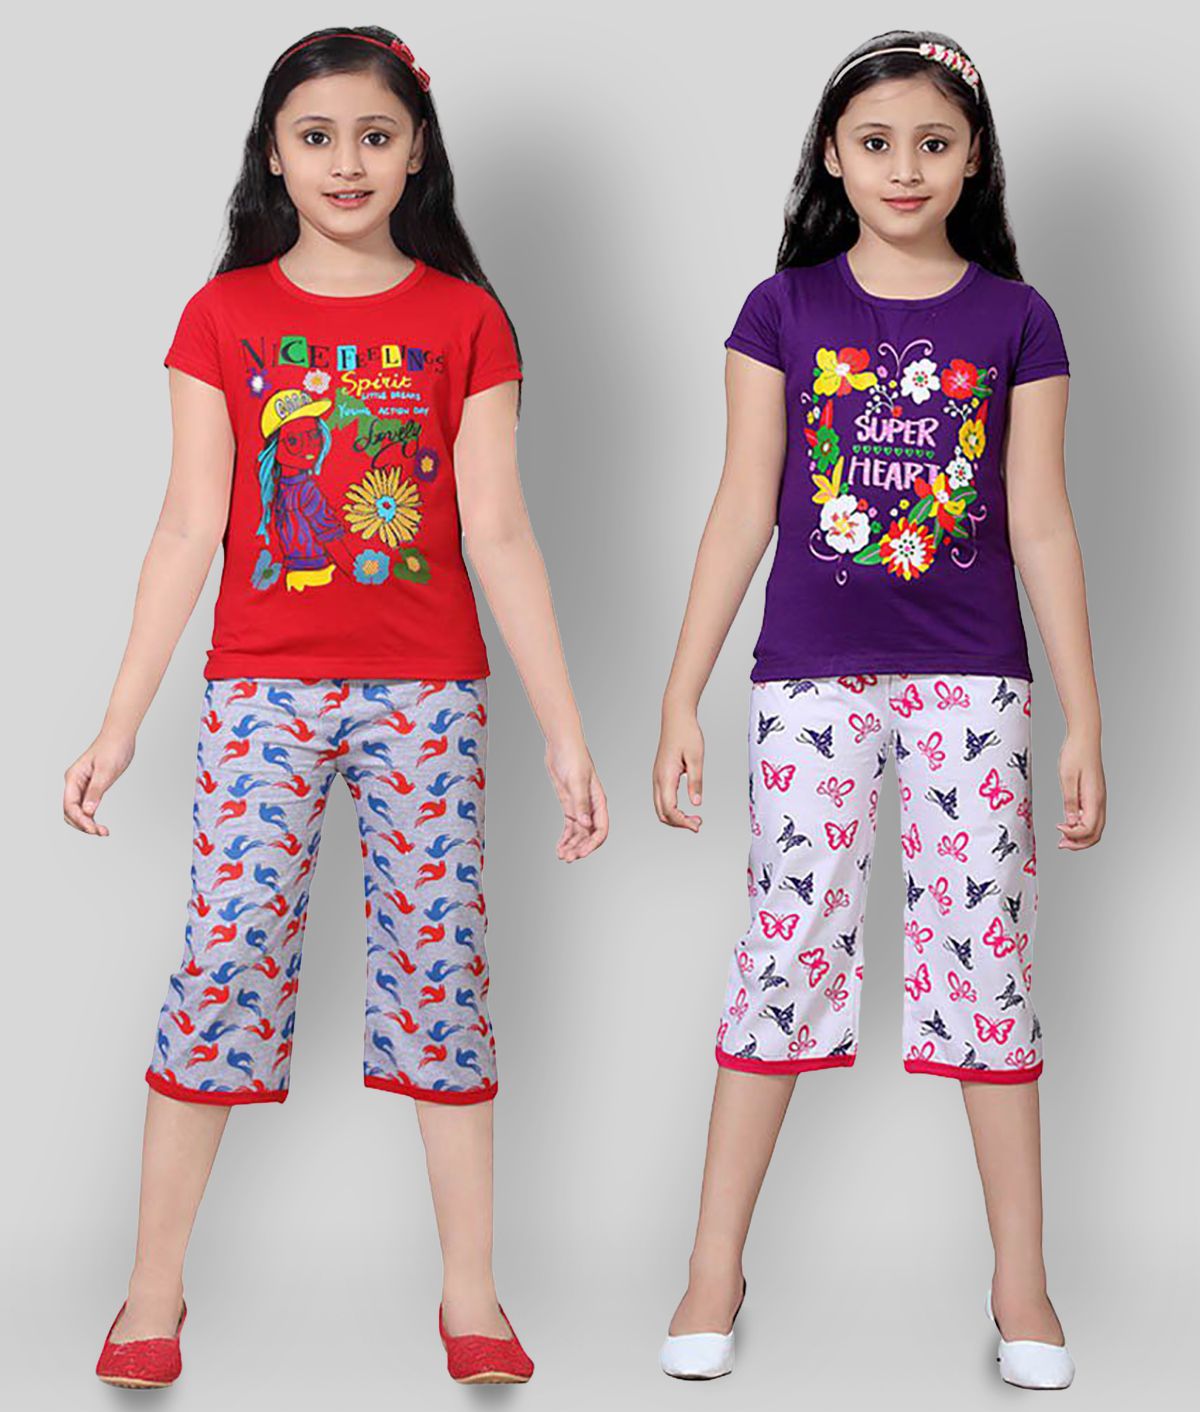     			Sini Mini - Multicolor Cotton Girl's T-Shirt With Capris ( Pack of 2 )